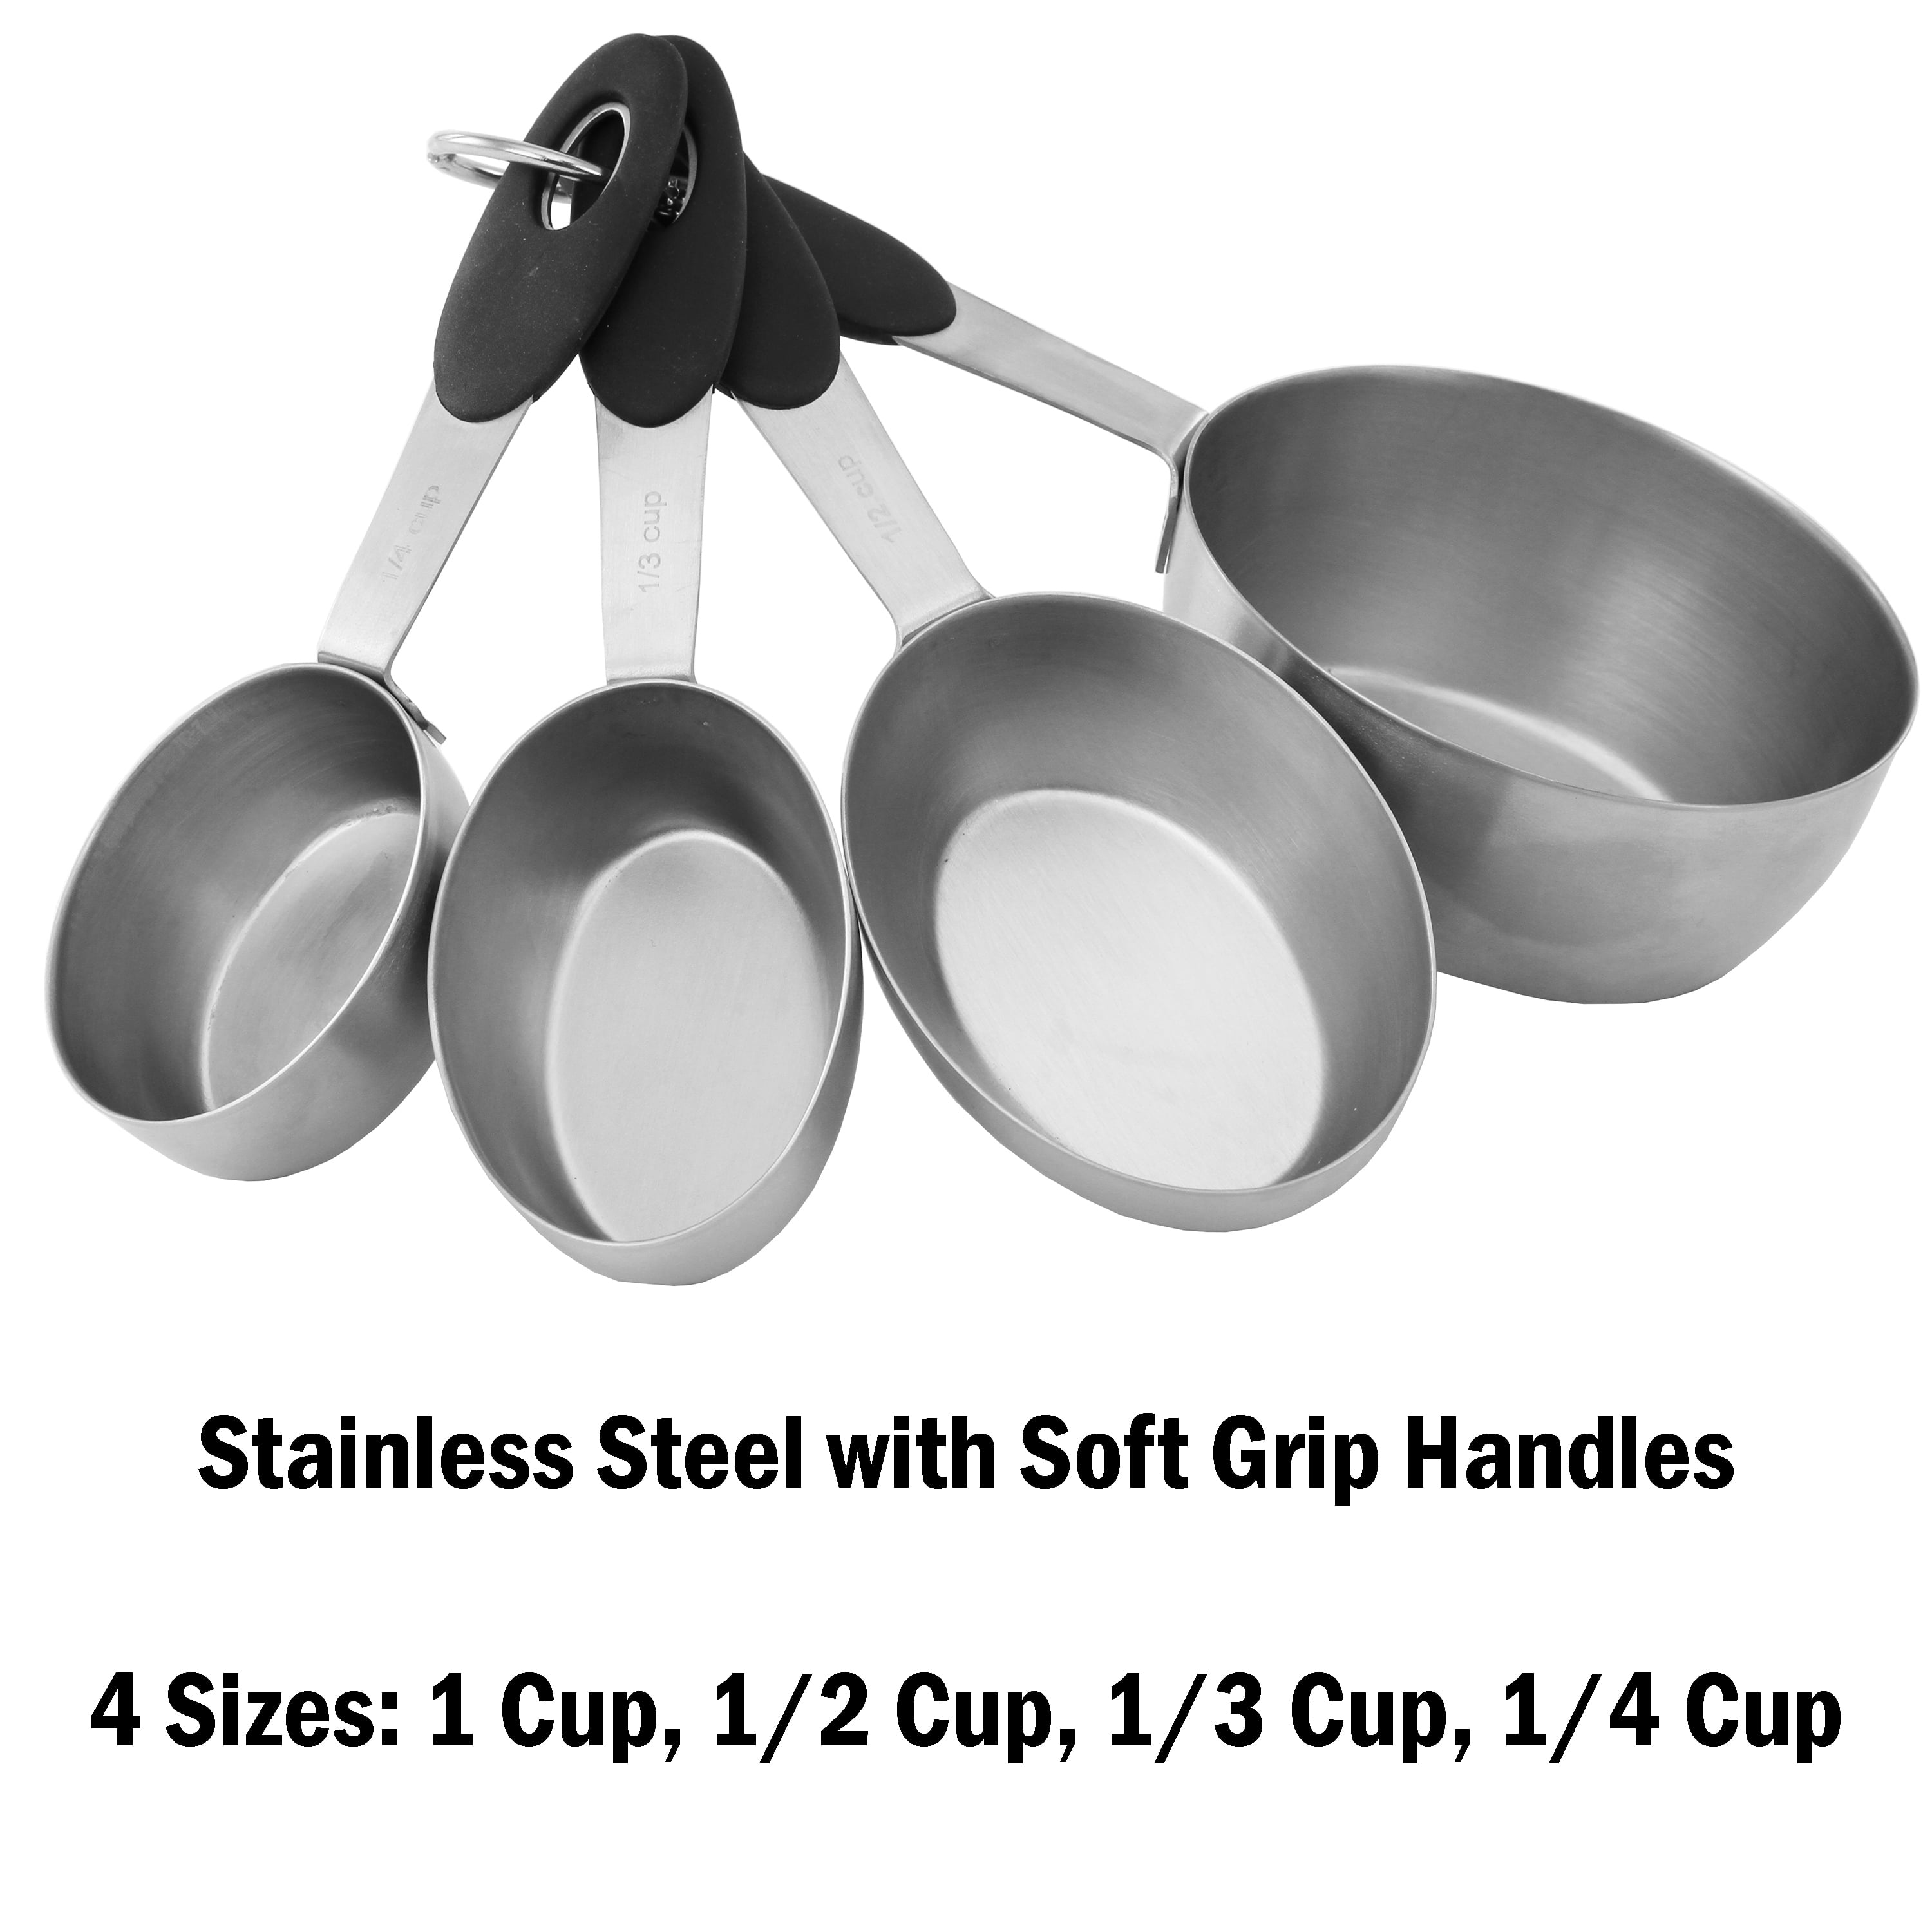 Foley Stainless Stacking Measuring Cups 1 Cup, 1/2 Cup, 1/3 Cup